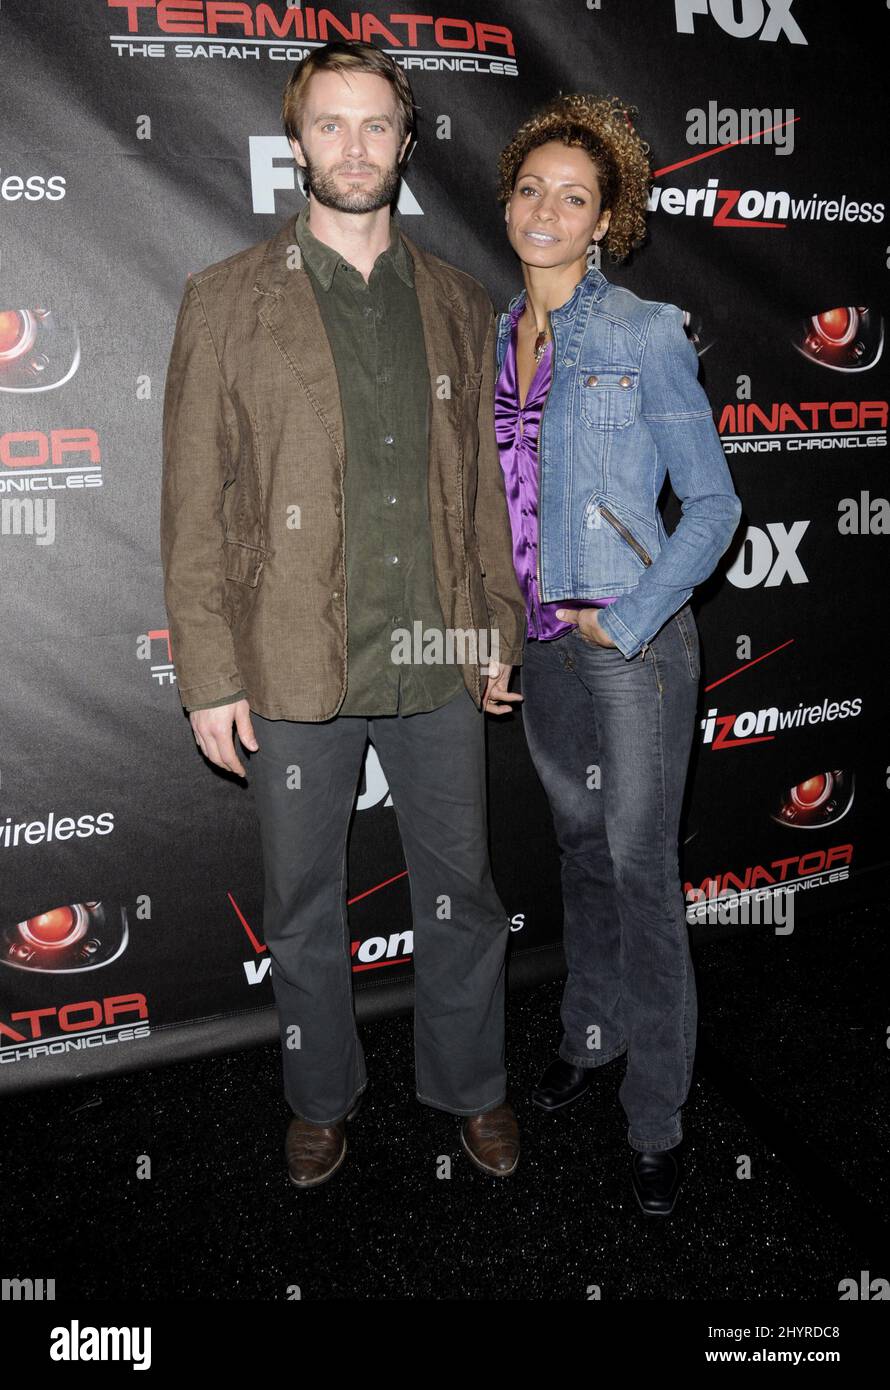 Garret Dillahunt and wife Michelle Hurd attend Terminator: The Sarah Connor Chronicles Premiere, held at the Cinerama Dome, Hollywood, California Stock Photo